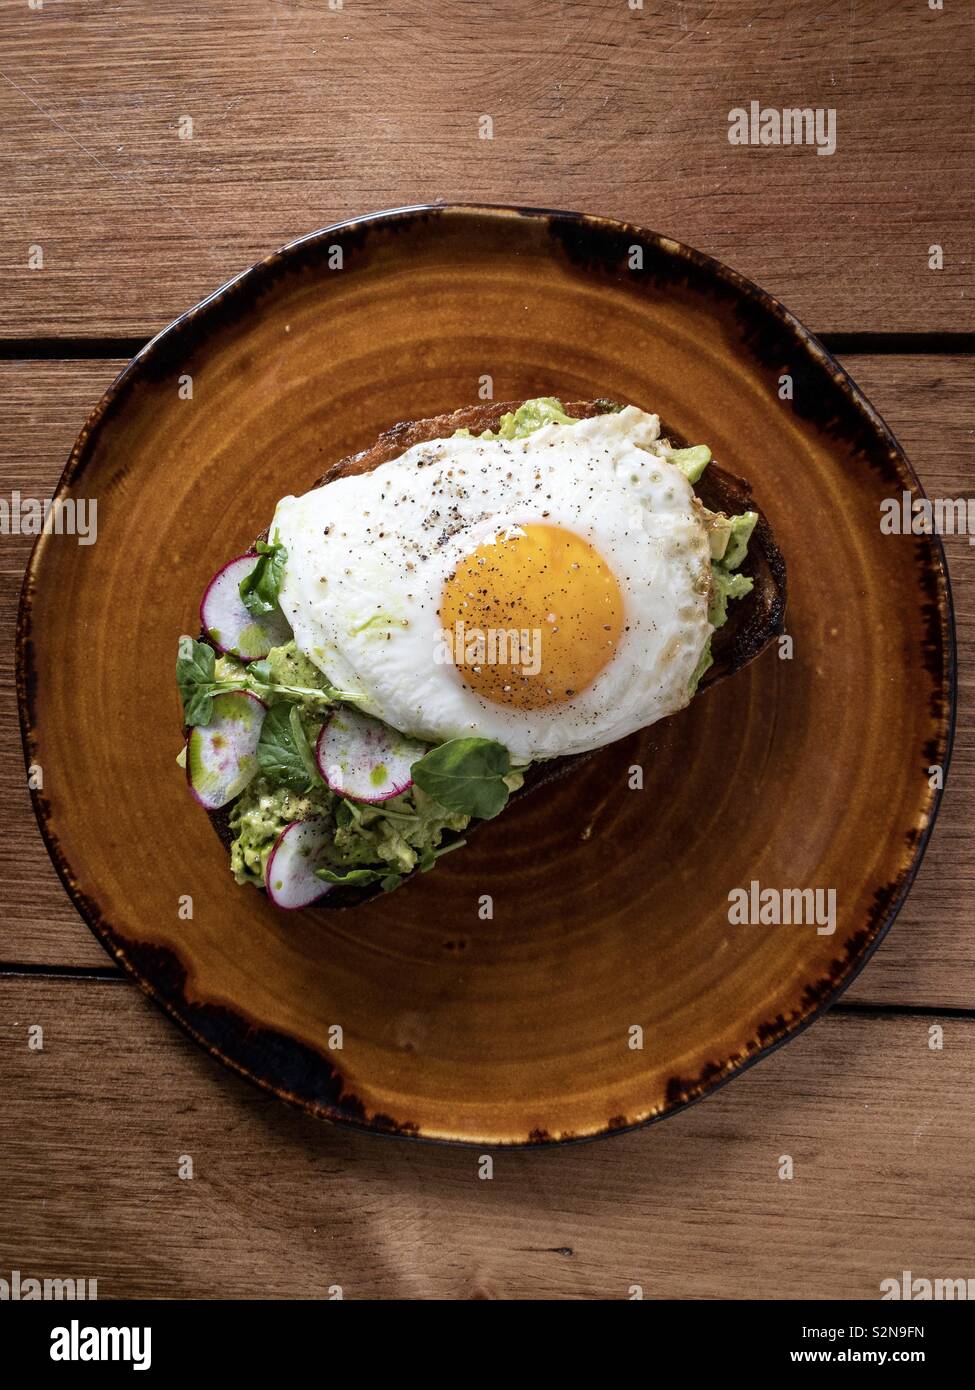 Avocado toast with sunny side up egg on brown plate at breakfast Stock Photo